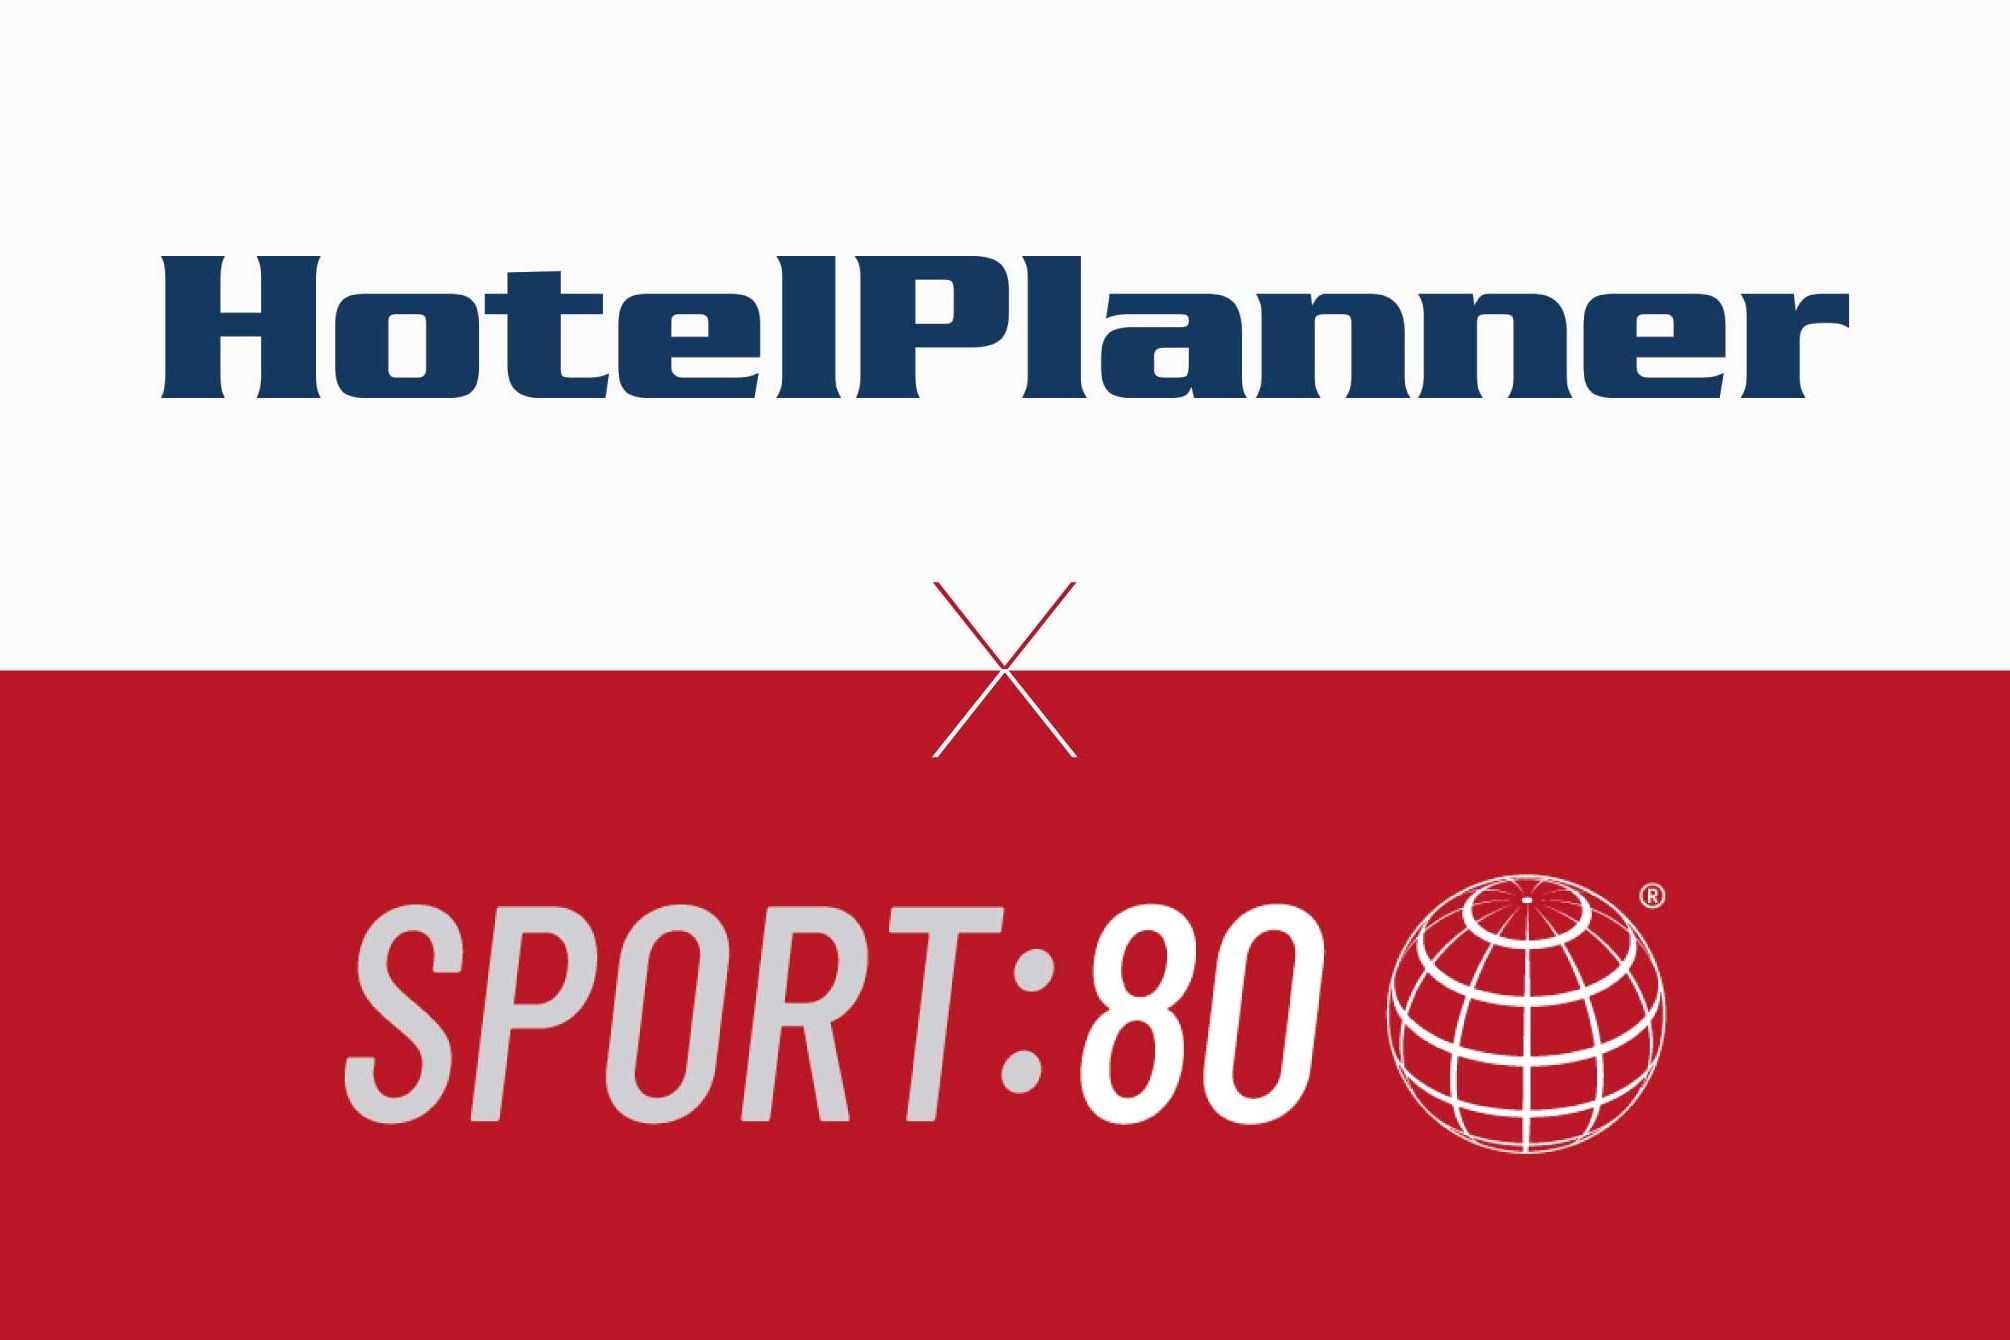 How NGBs can generate revenue and make booking accommodation a breeze through Sport:80’s partnership with HotelPlanner